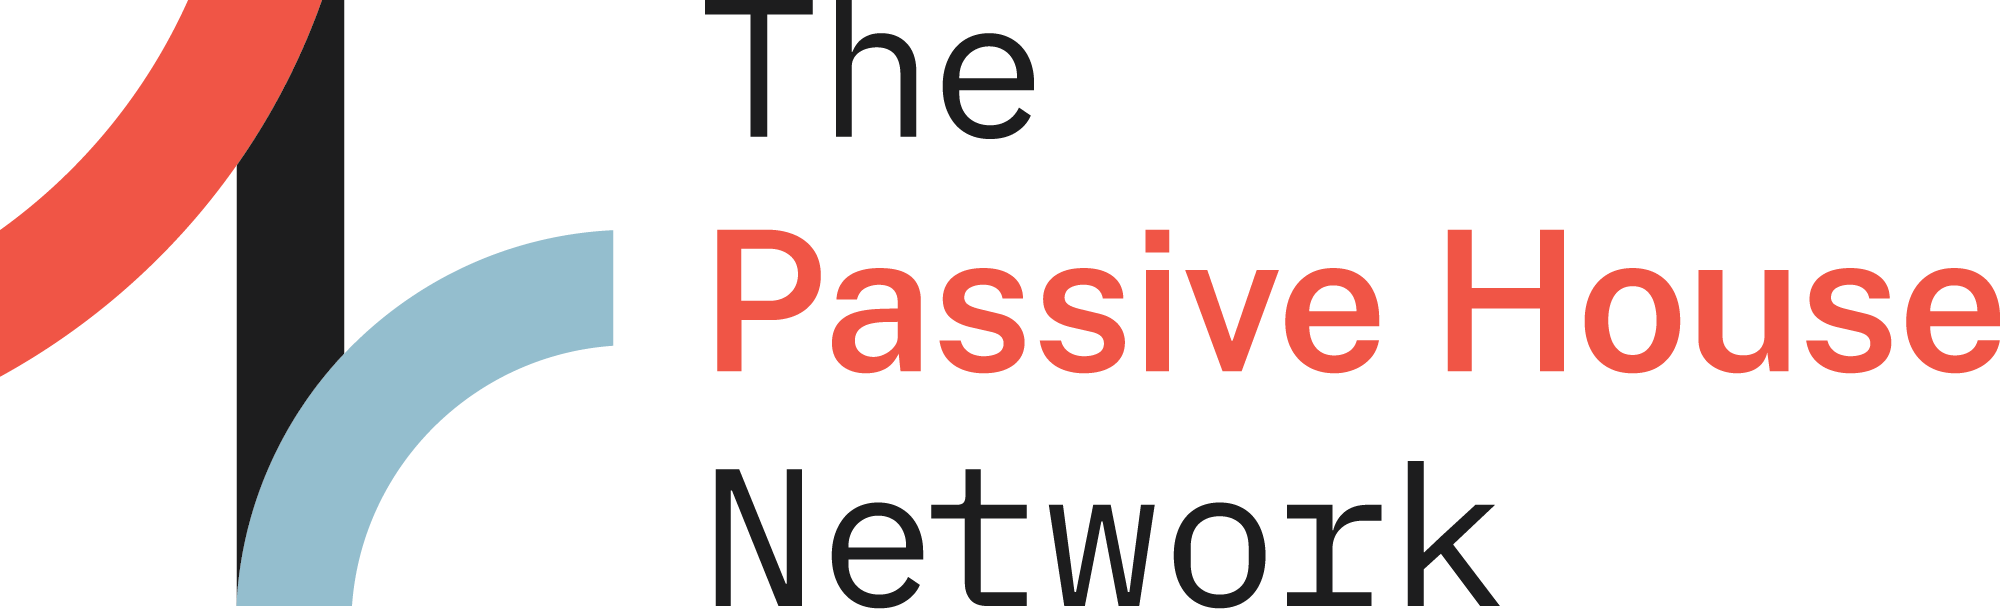 The Passive House Network